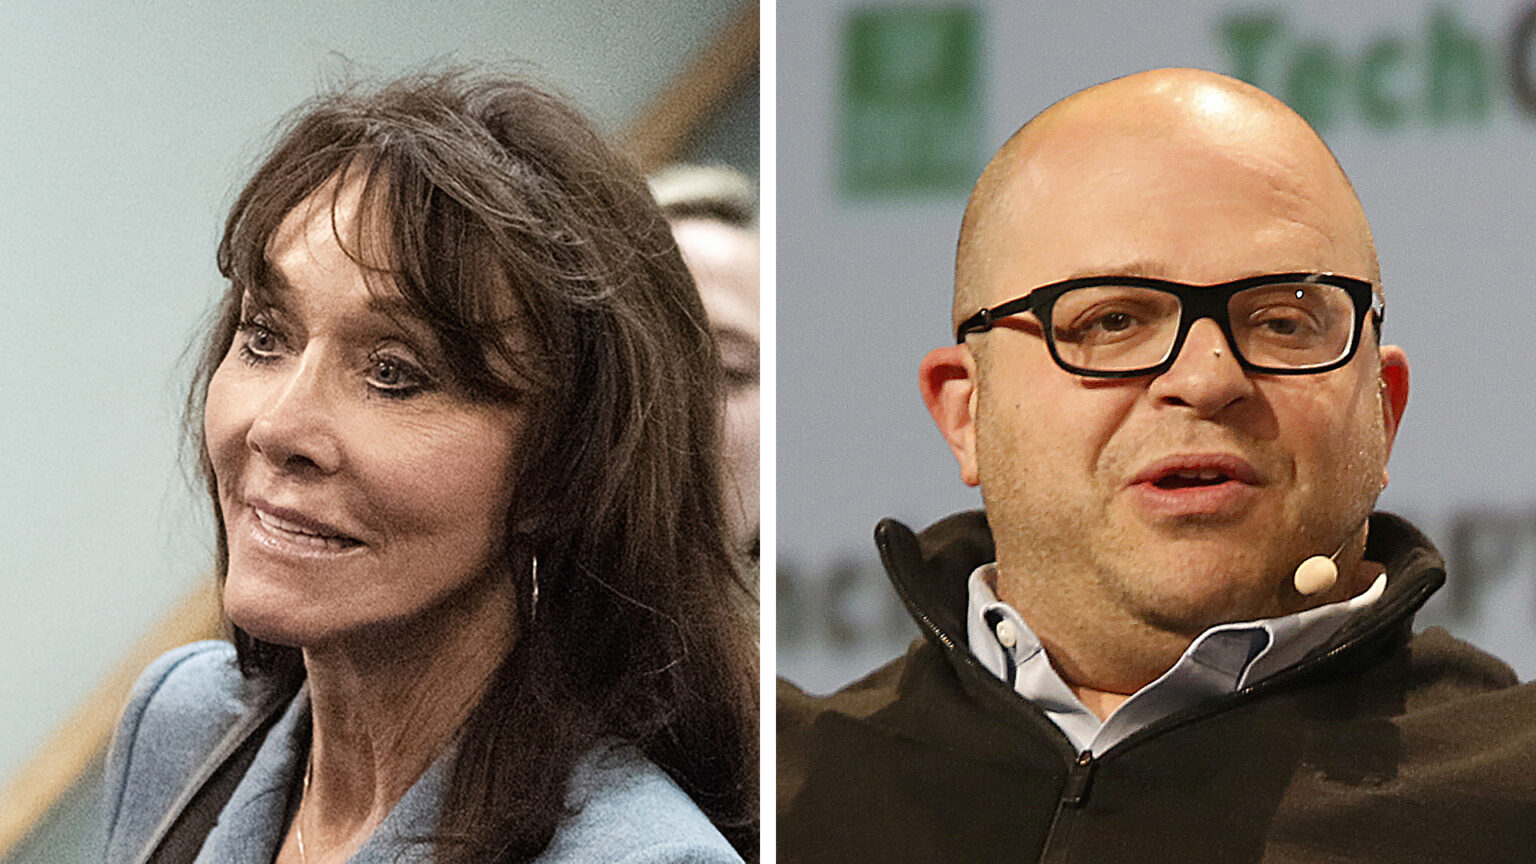 Two side-by-side photos show Diane Hendricks and Jeff Lawson in different locations.